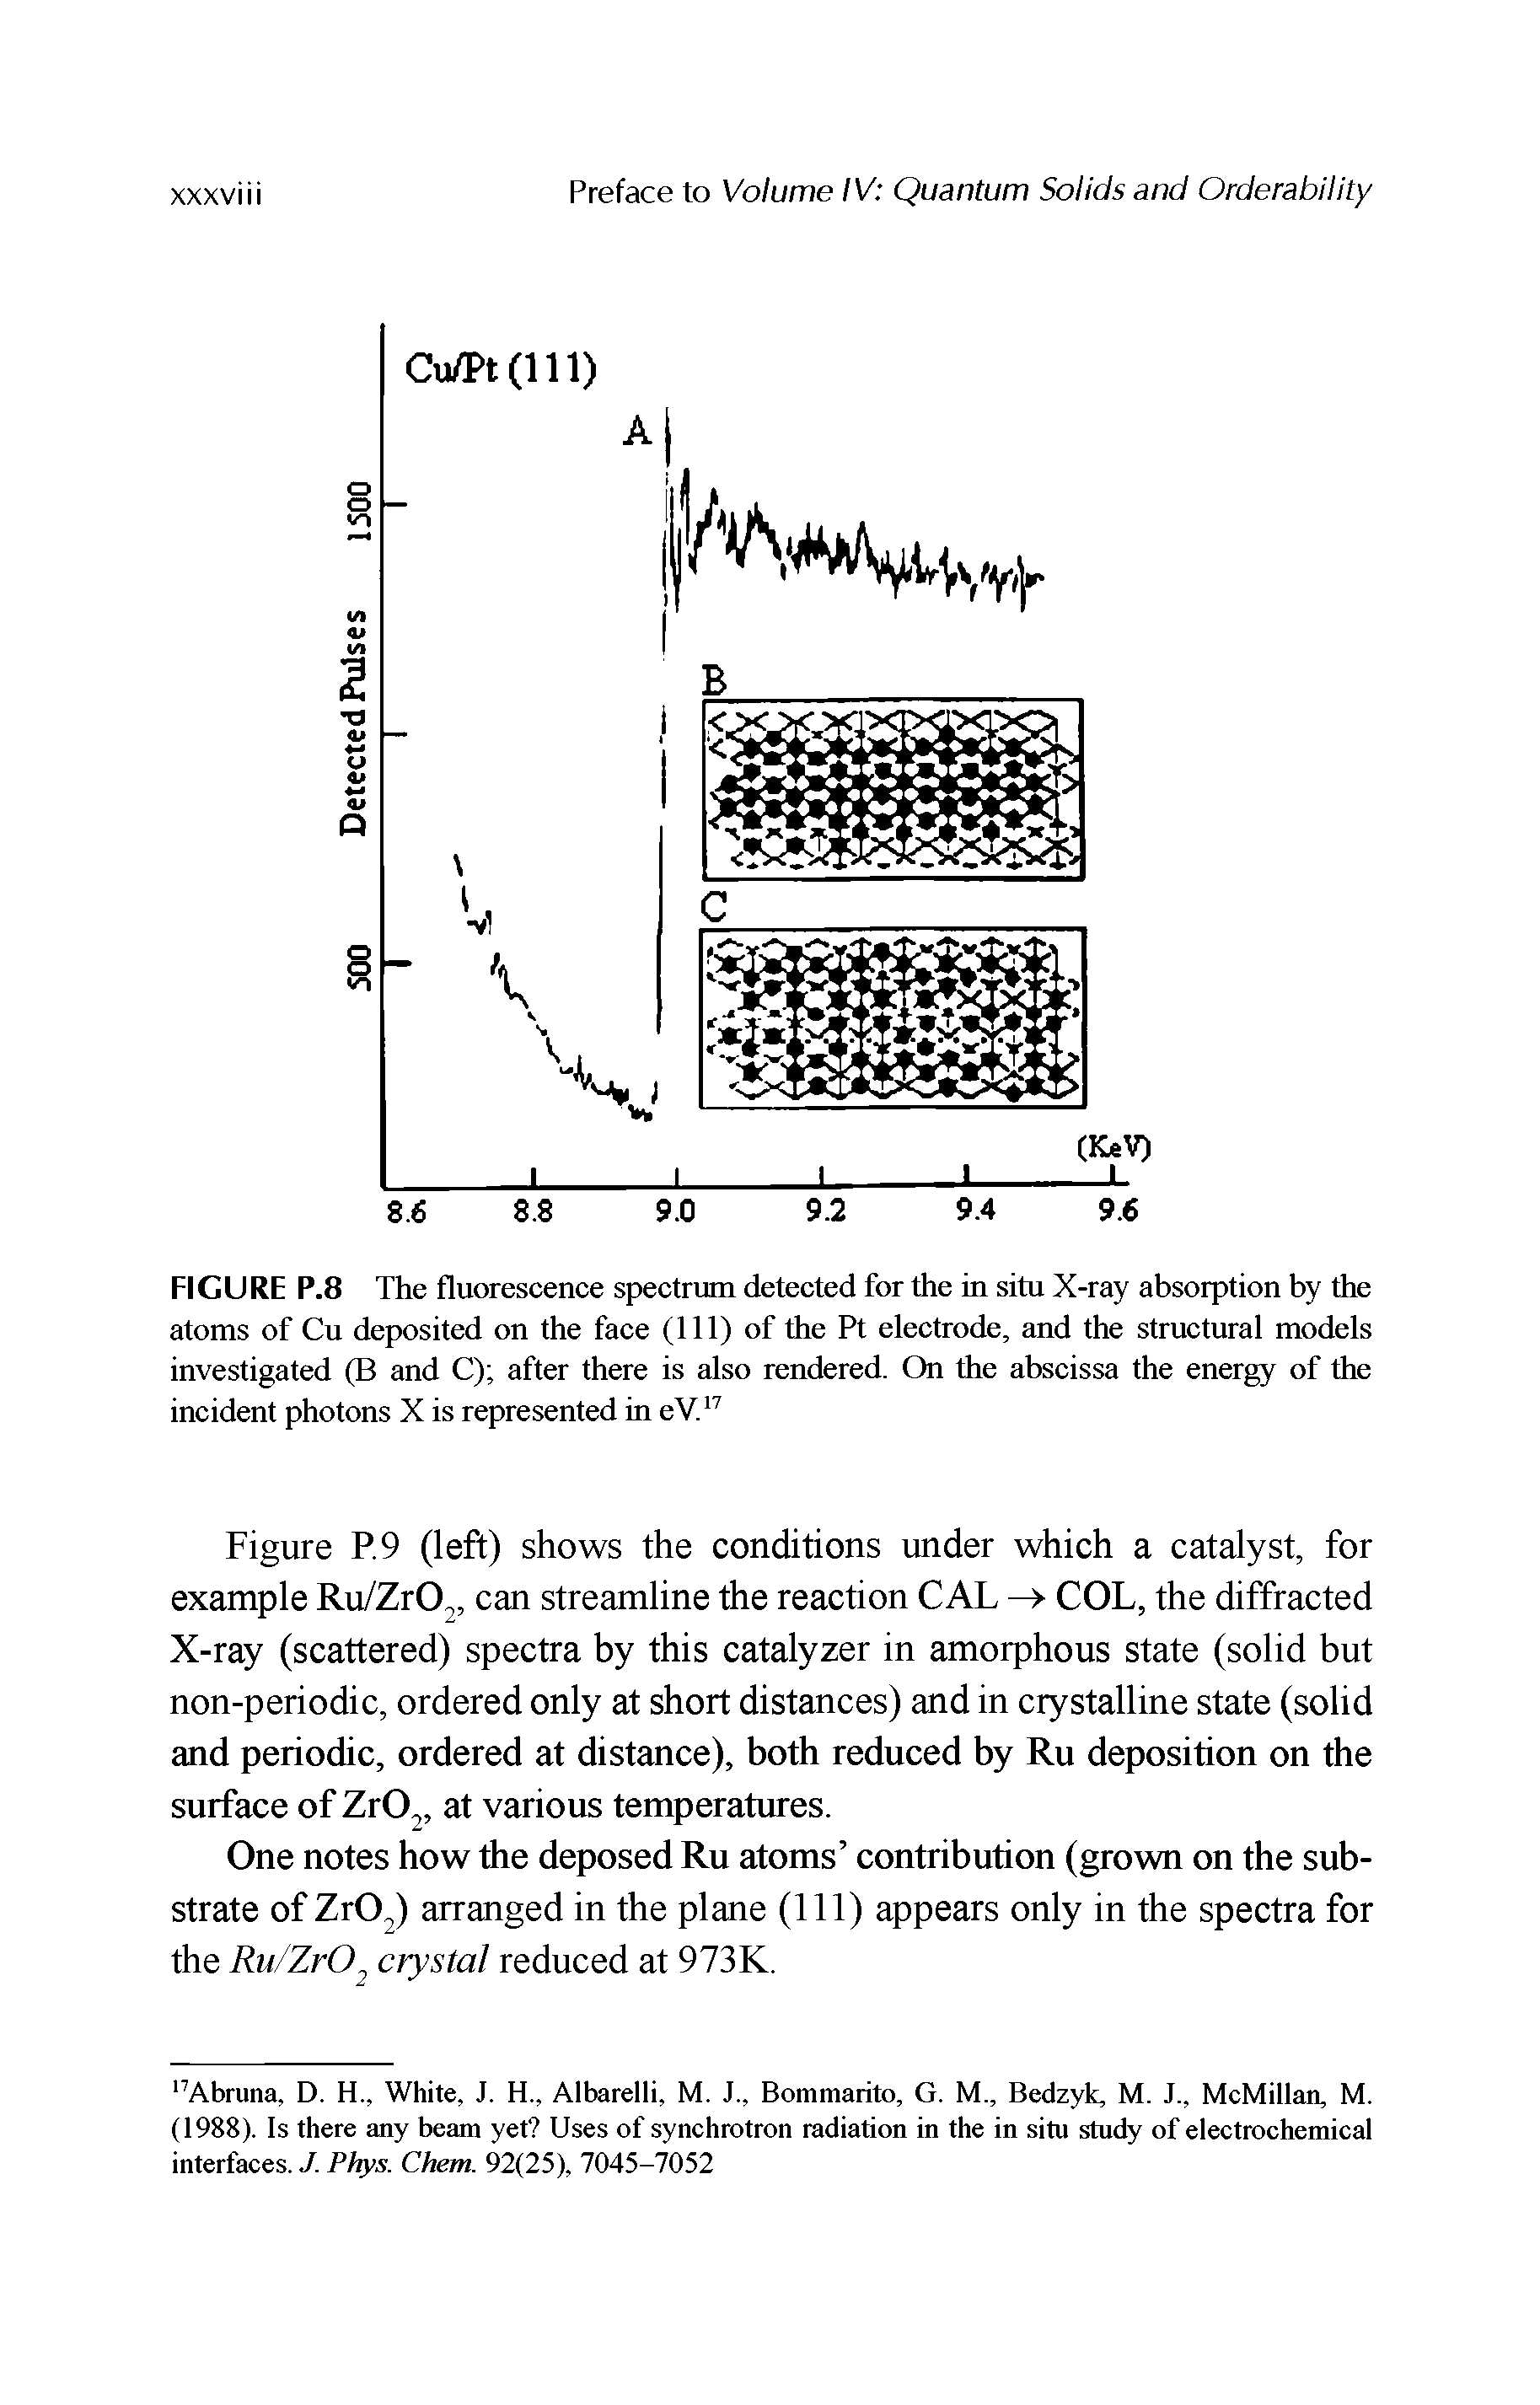 Figure P.9 (left) shows the conditions under which a catalyst, for example Ru/ZrO, can streamline the reaction CAL -> COL, the diffracted X-ray (scattered) spectra by this catalyzer in amorphous state (solid but non-periodic, ordered only at short distances) and in crystalline state (solid and periodic, ordered at distance), both reduced by Ru deposition on the surface of Zr02, at various temperatures.